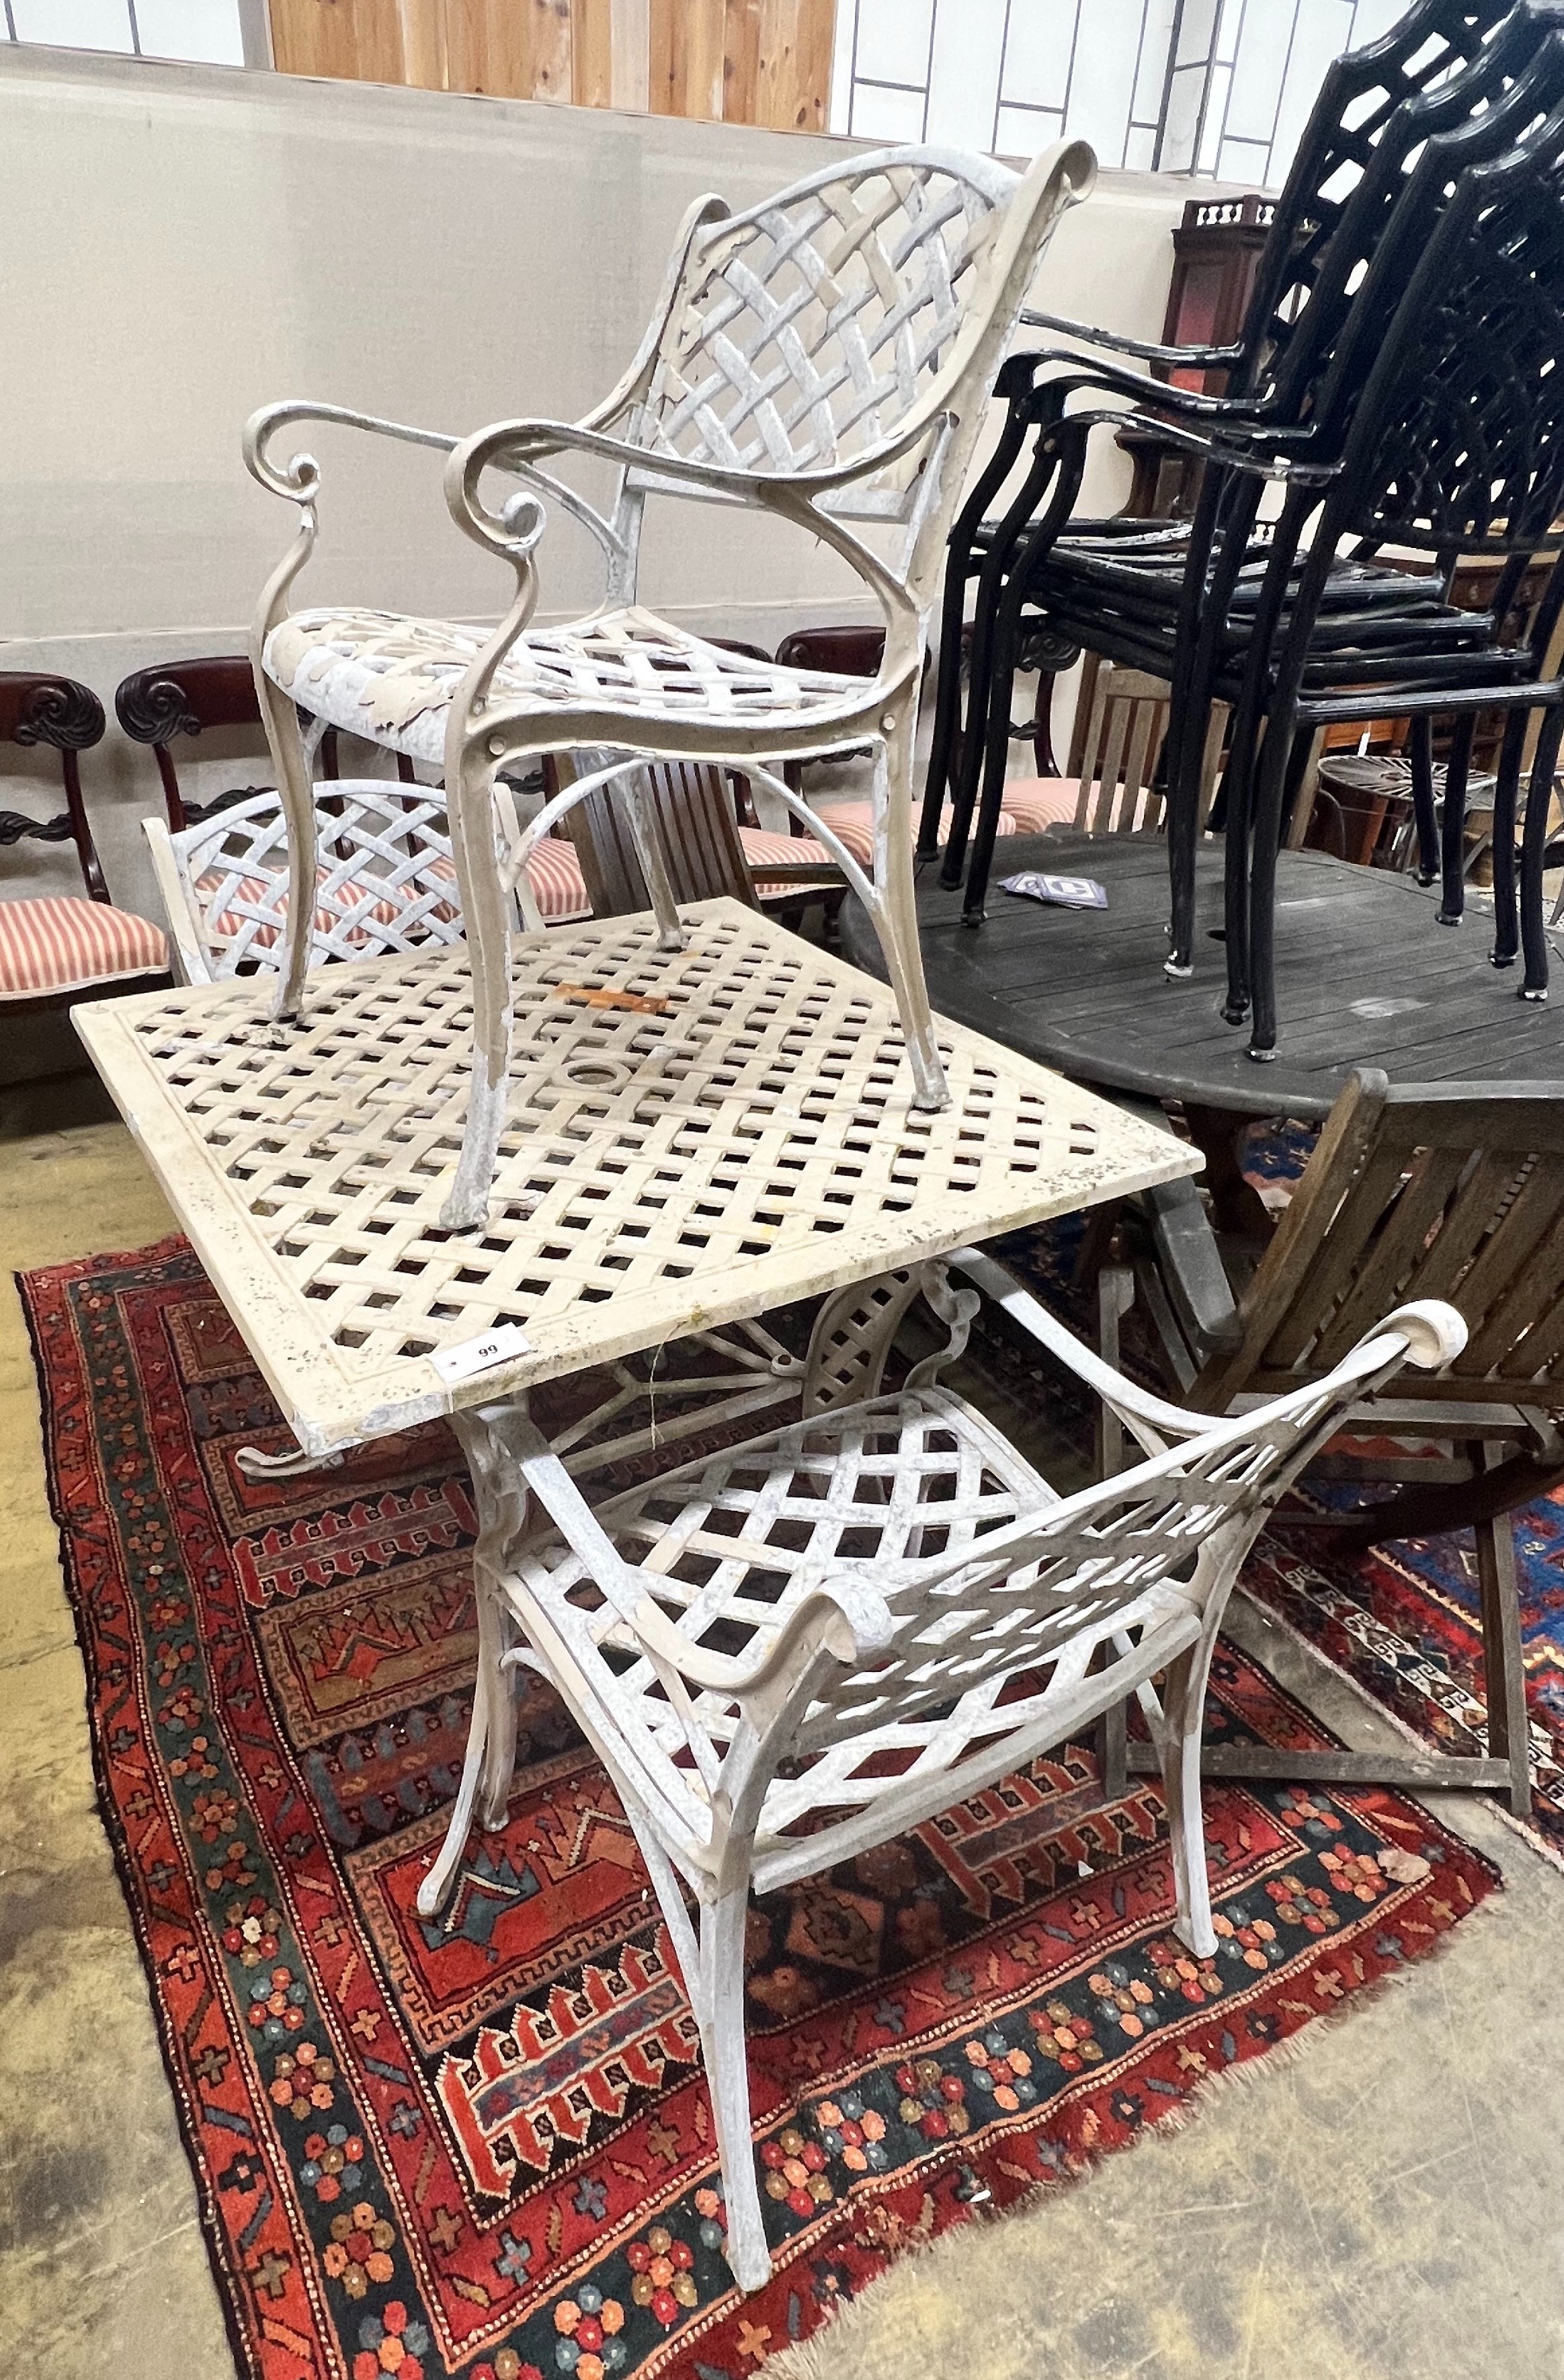 A square painted aluminium garden table and three elbow chairs, table width 91cm height 73cm